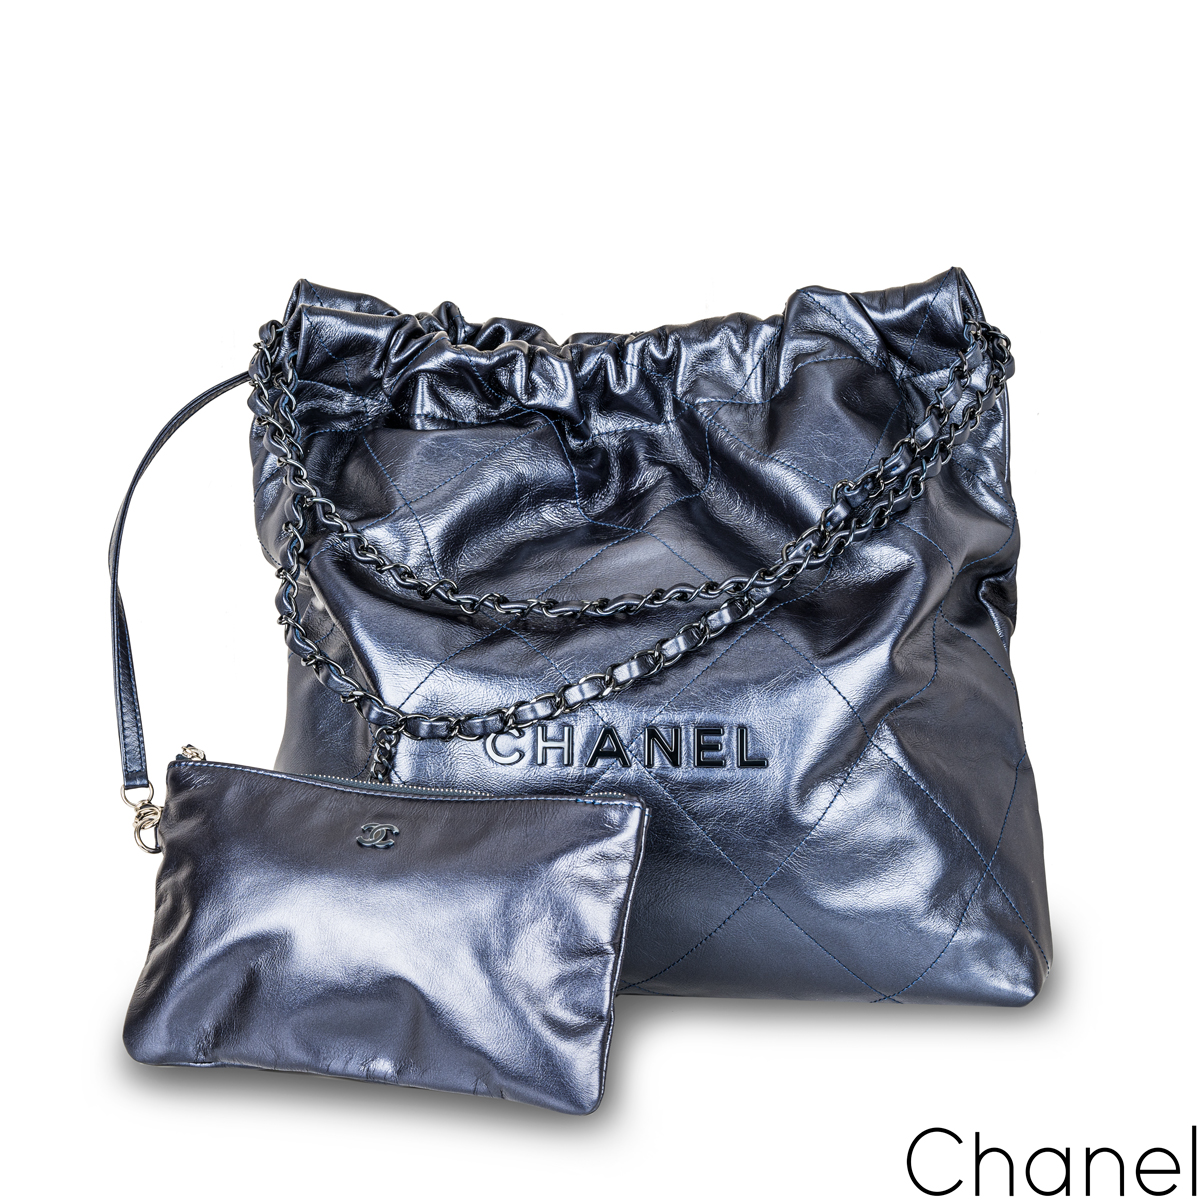 Chanel 22 leather mini bag Chanel Blue in Leather - 34278553